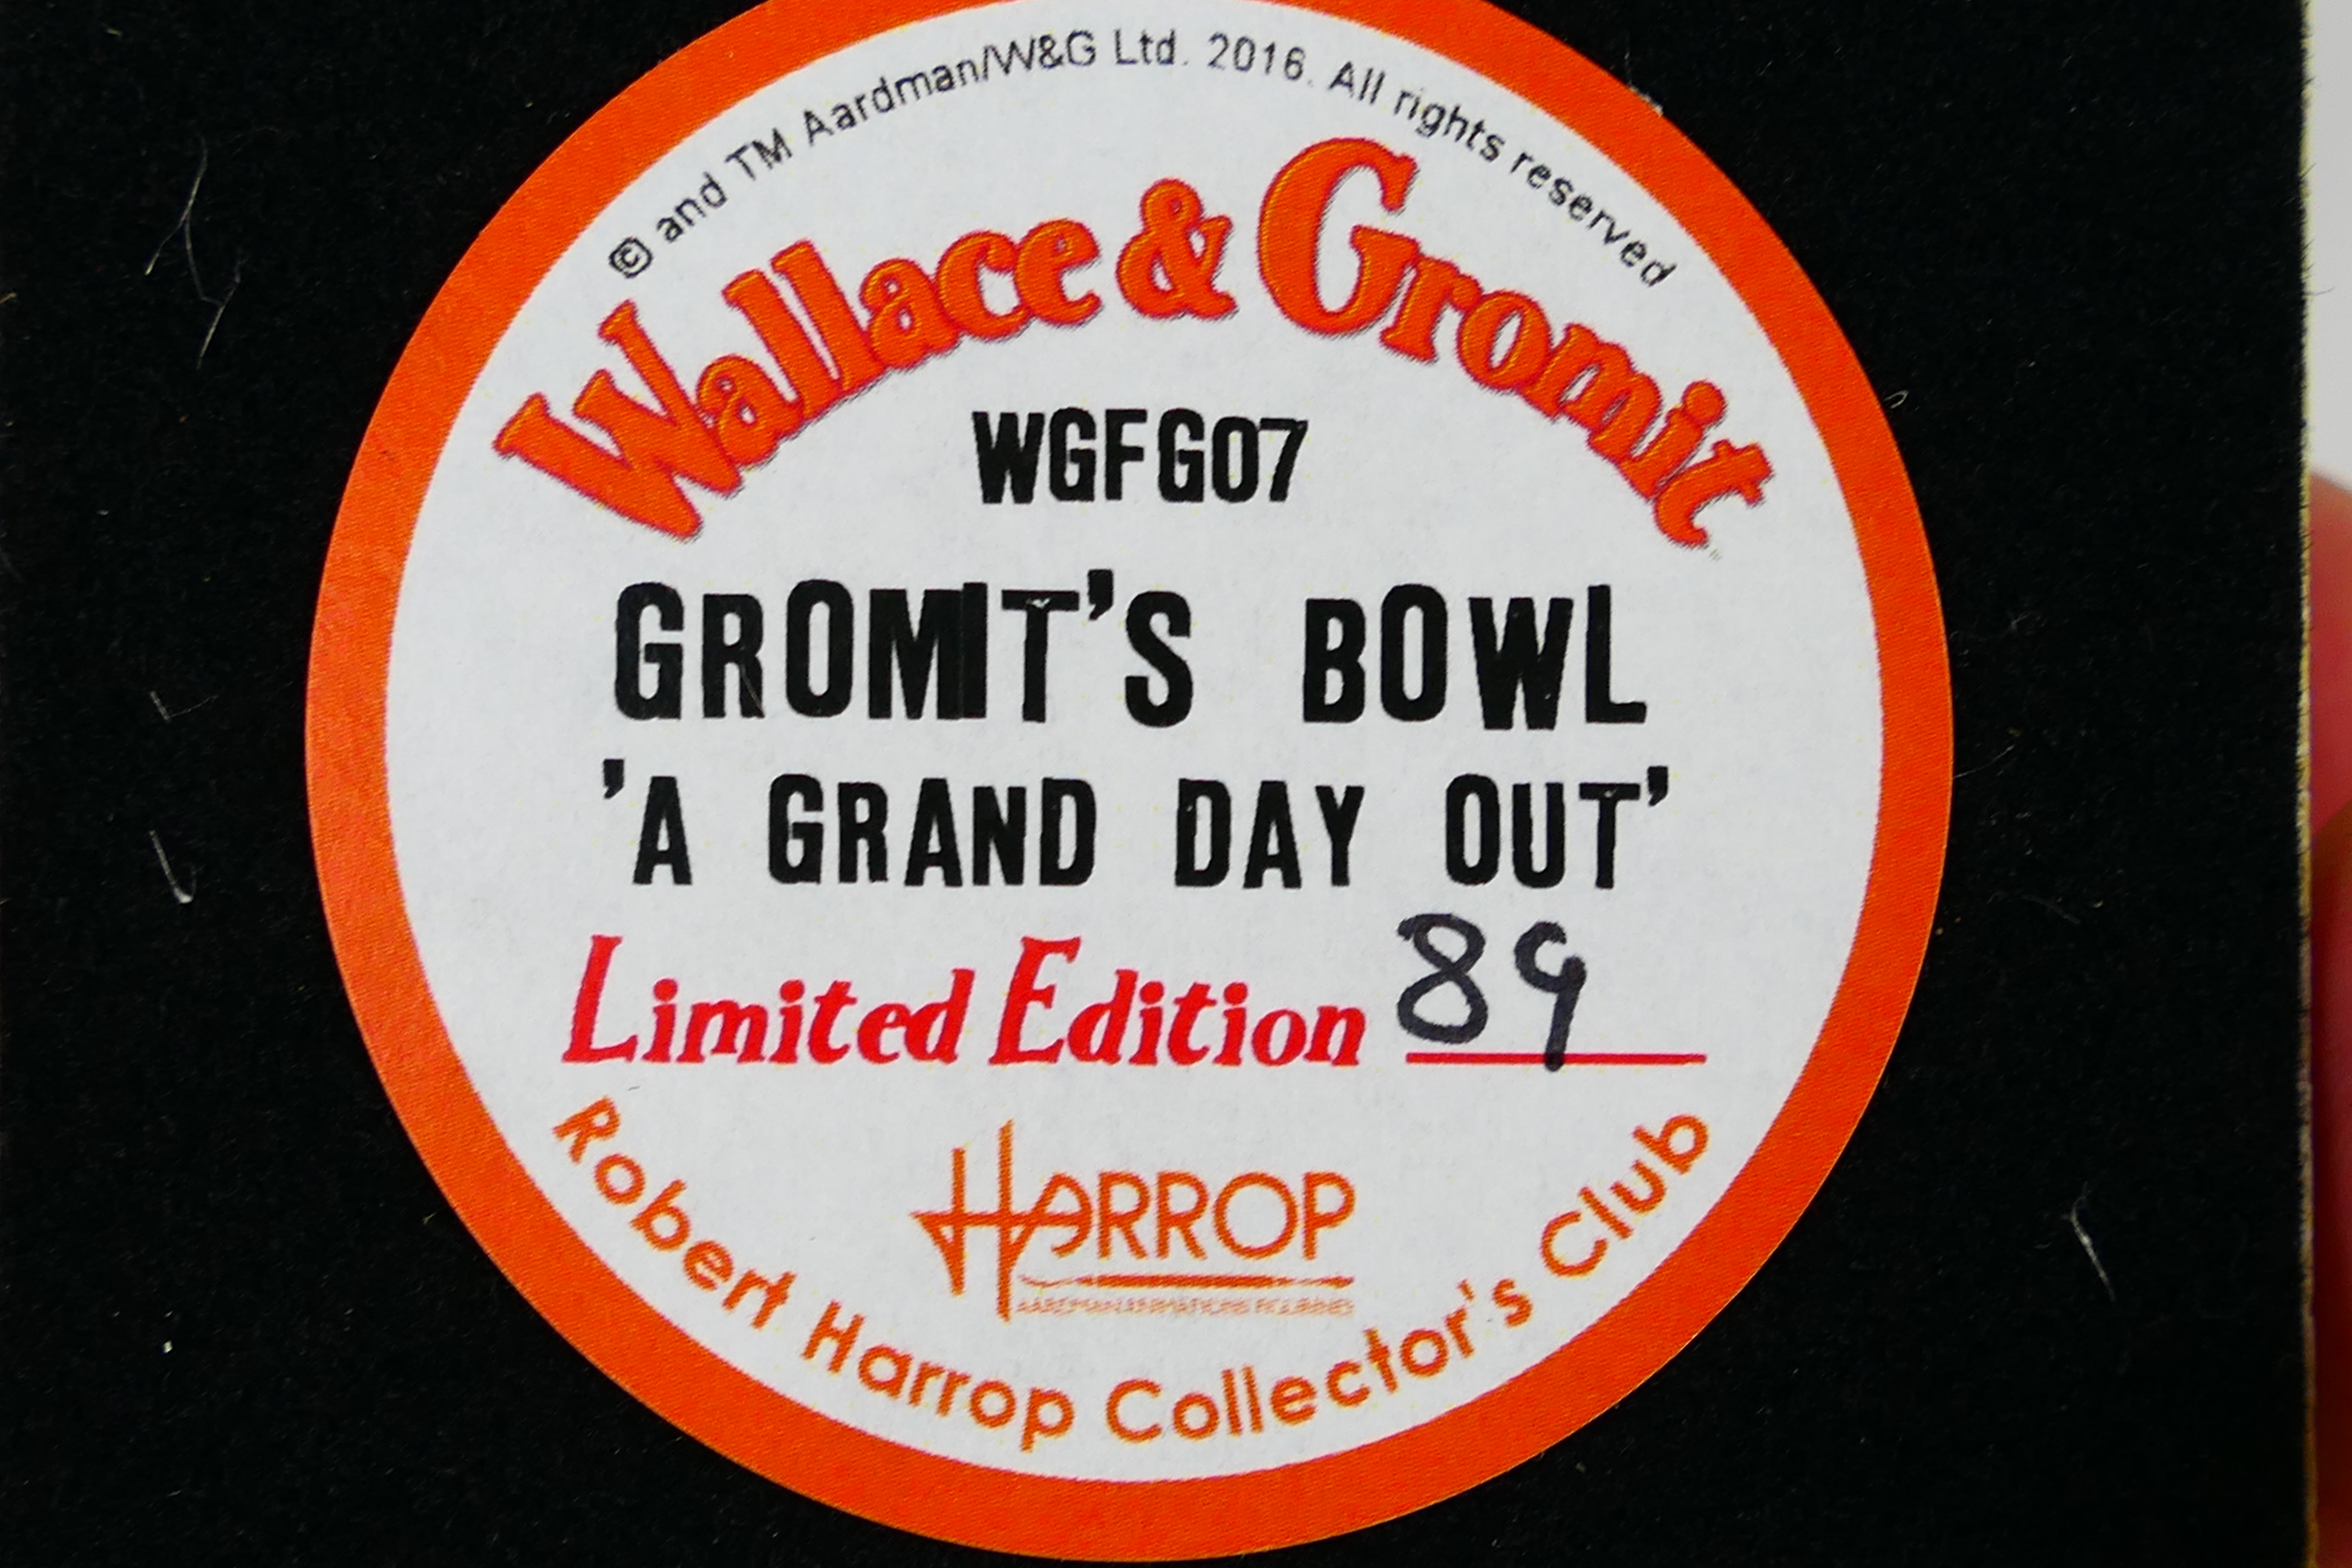 Robert Harrop - Wallace and Gromit - A Limited Edition (no. - Image 5 of 6